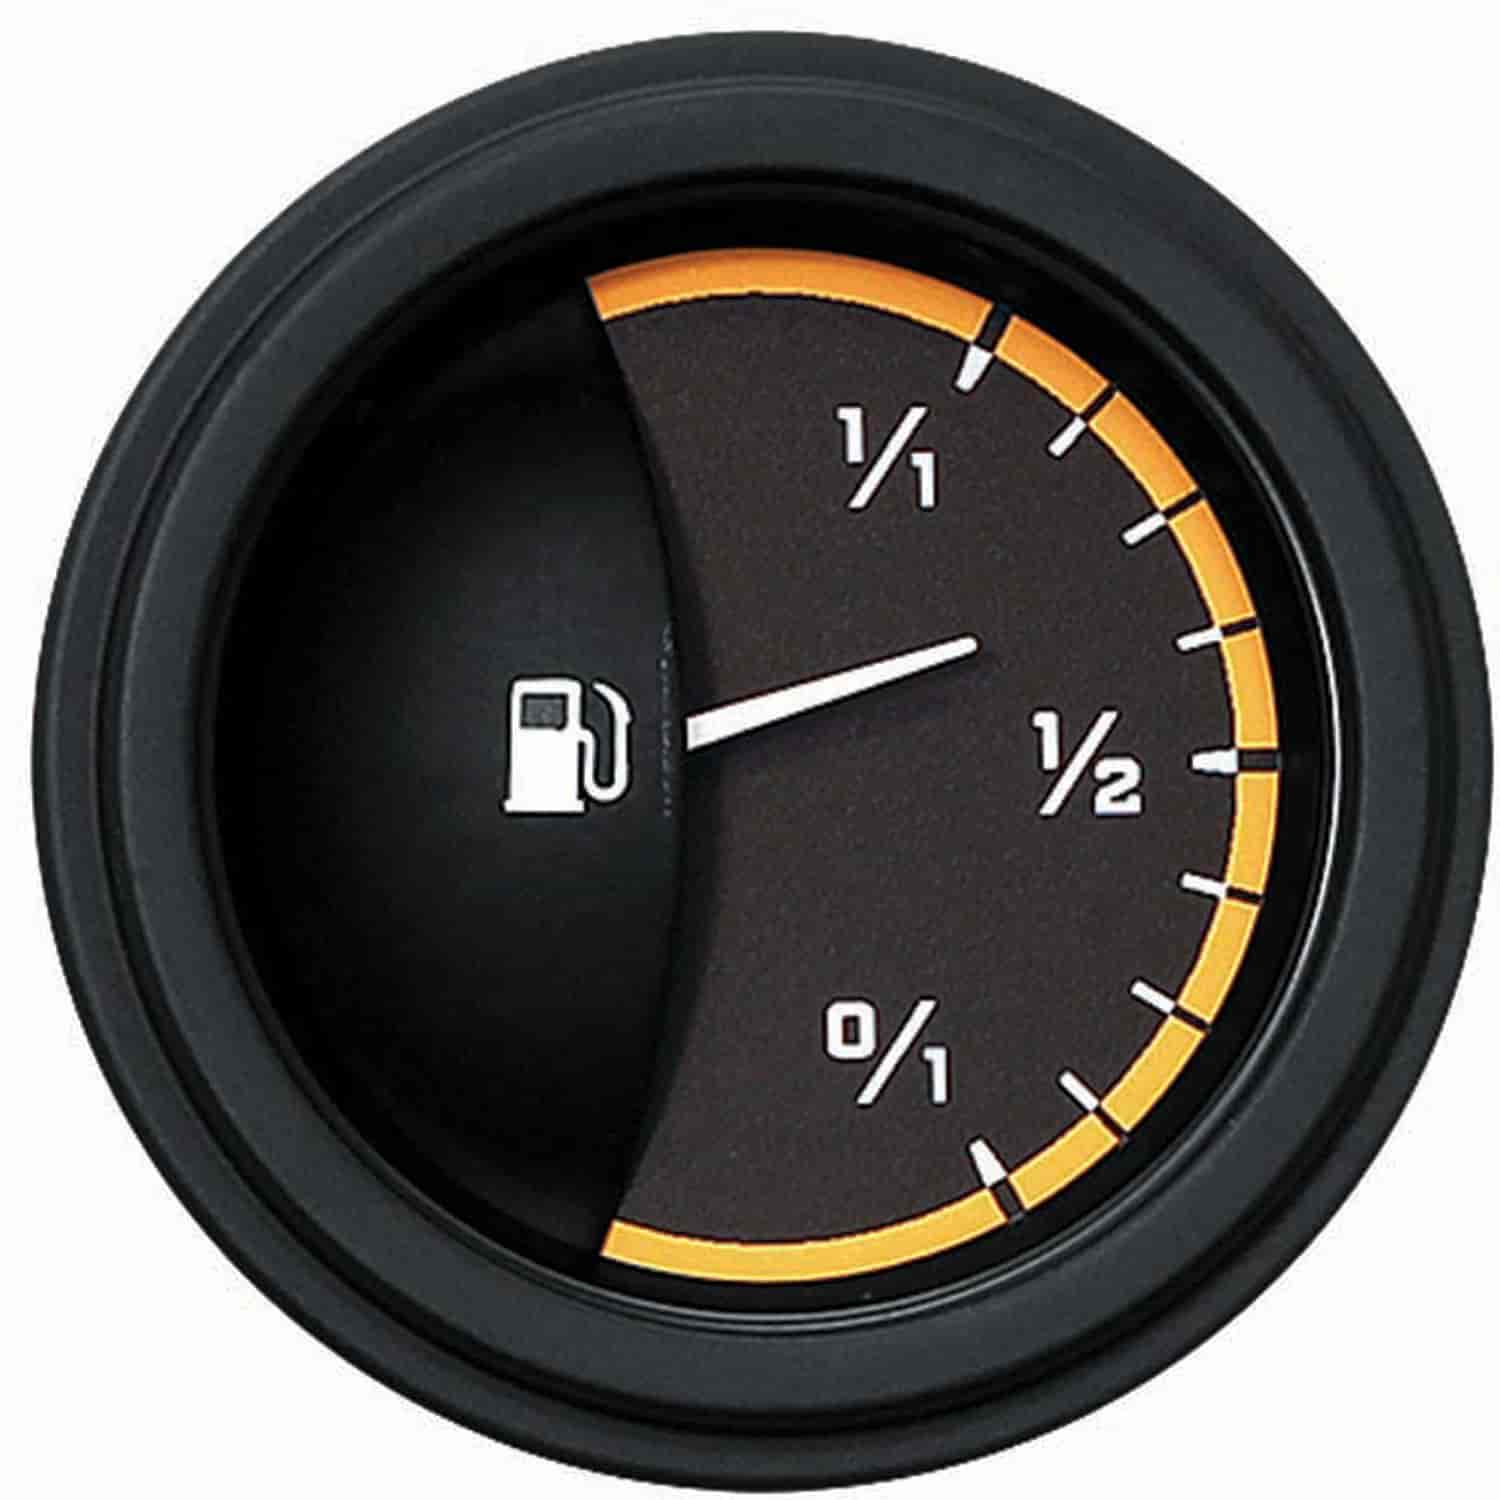 Yellow AutoCross Series Fuel Gauge 2-1/8" Electrical